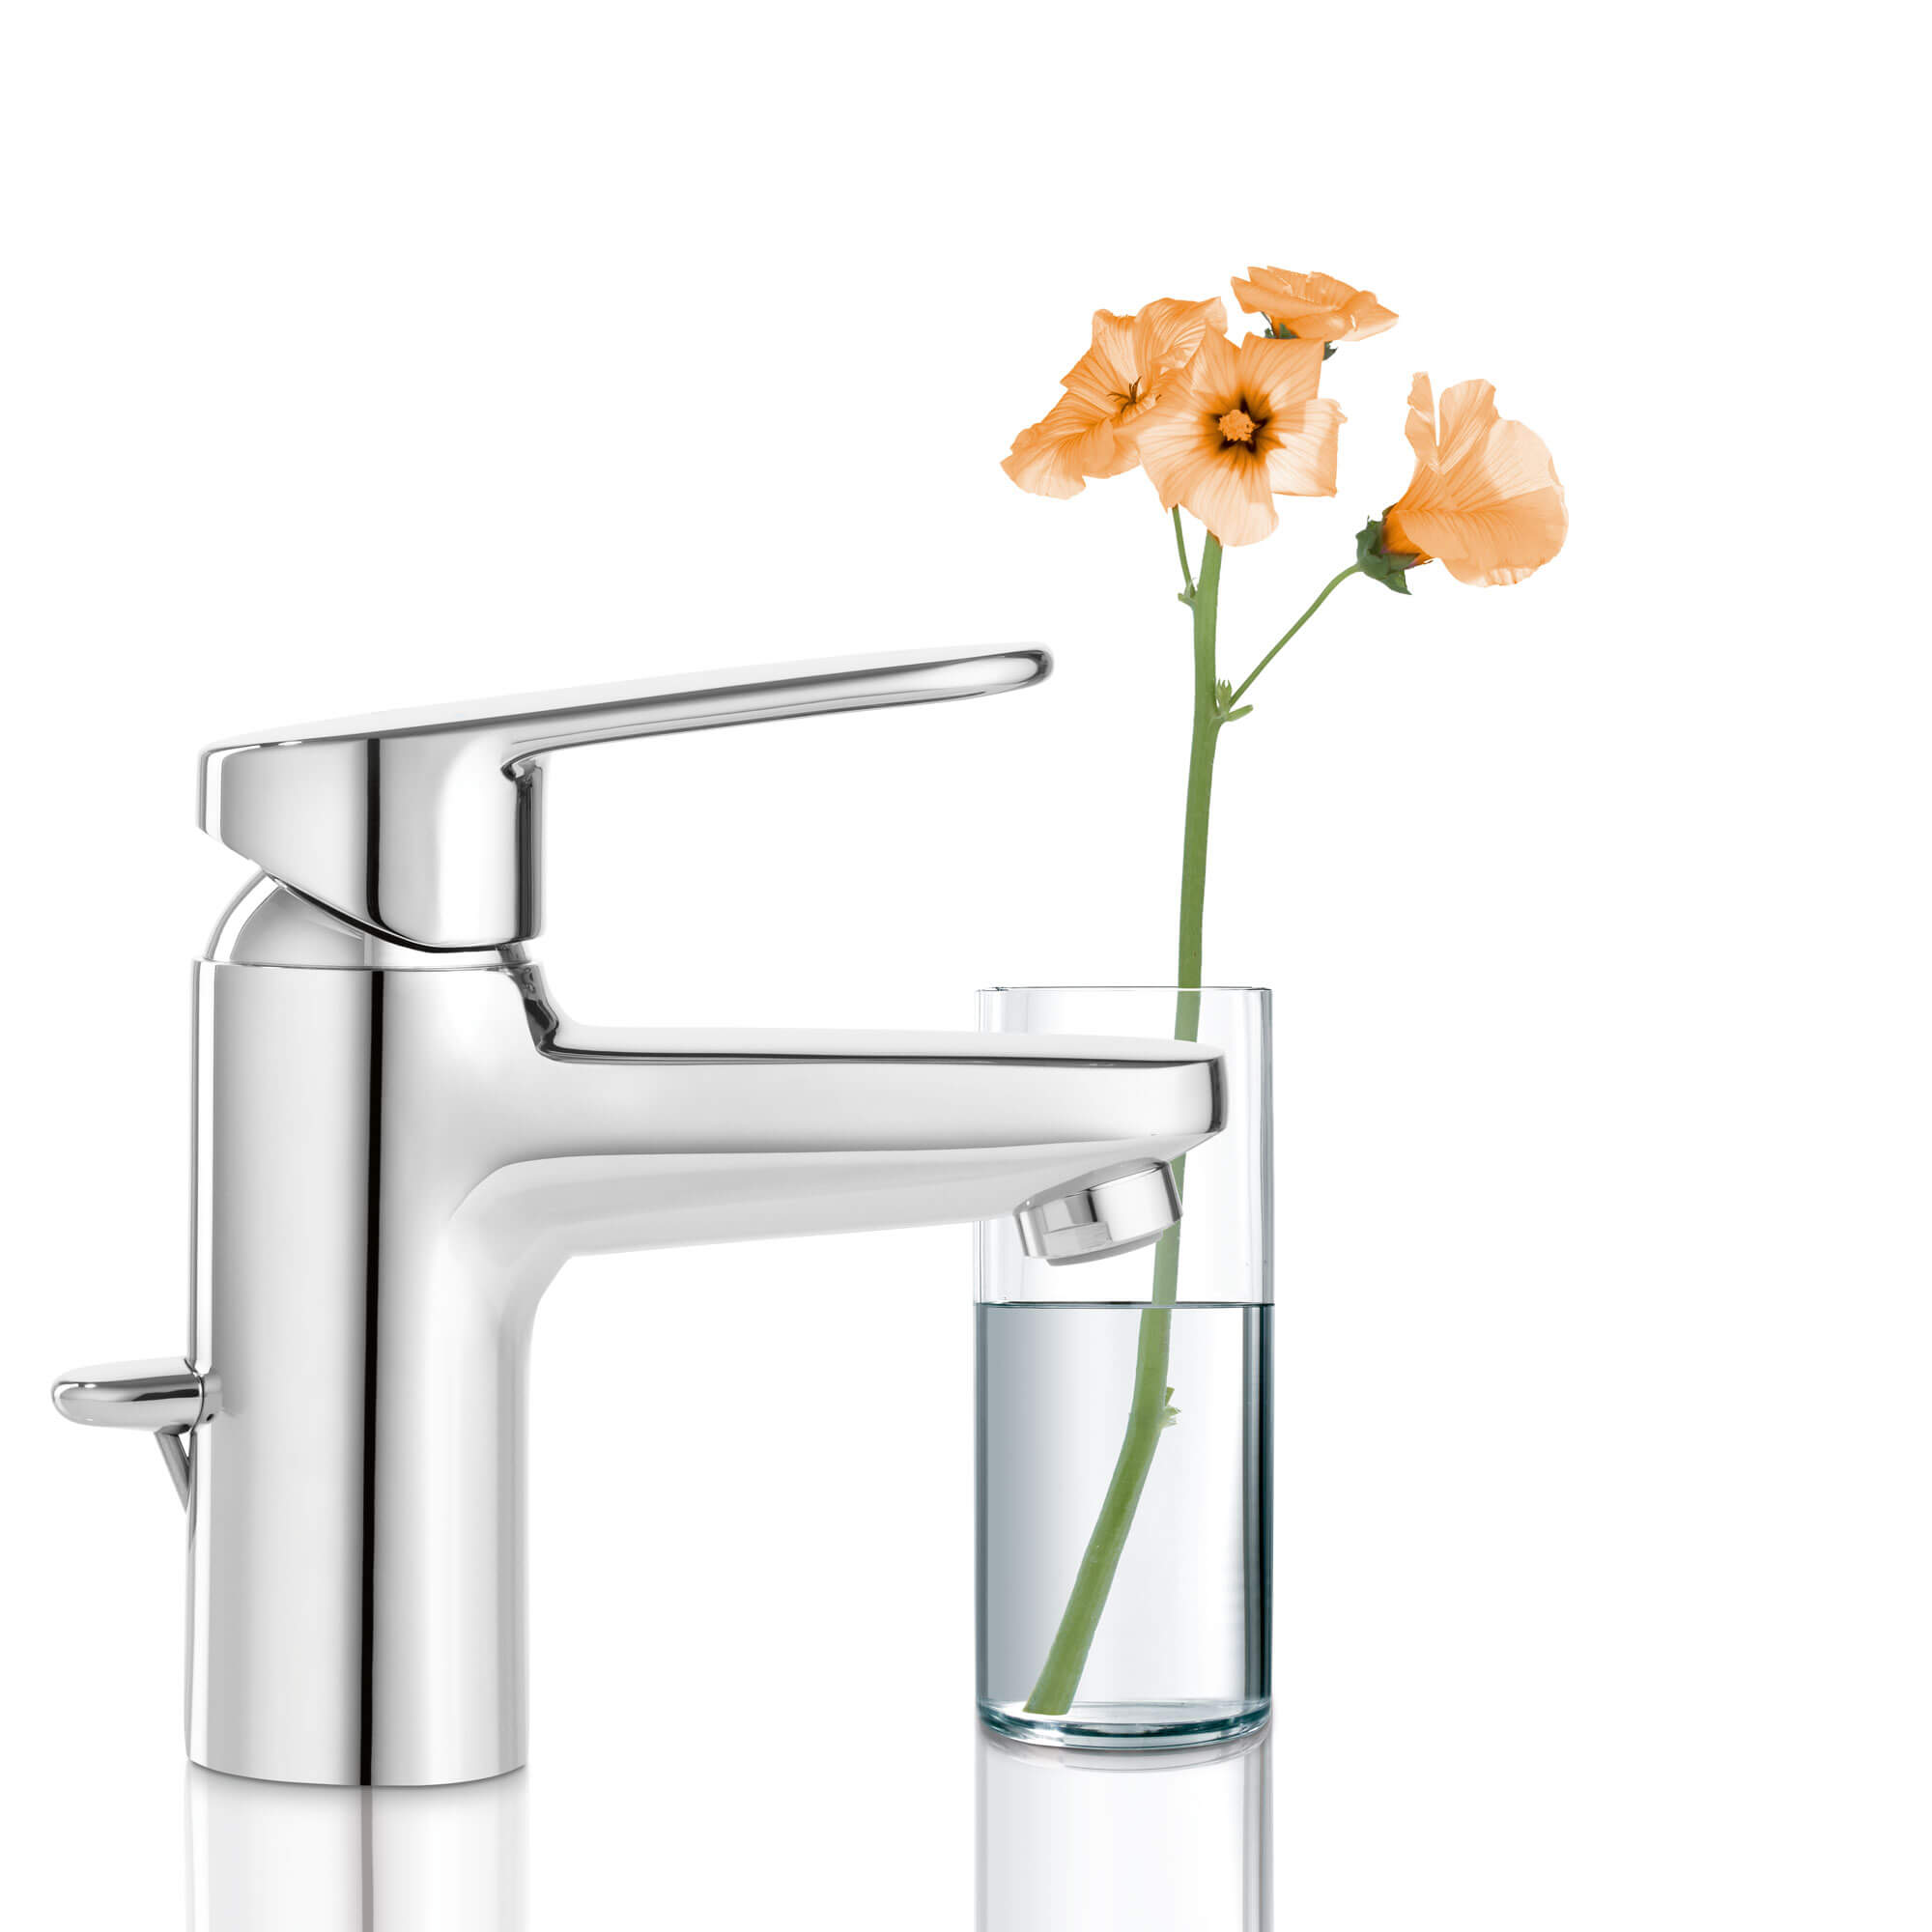 Europlus bathroom faucet next to a glass filled with flowers.